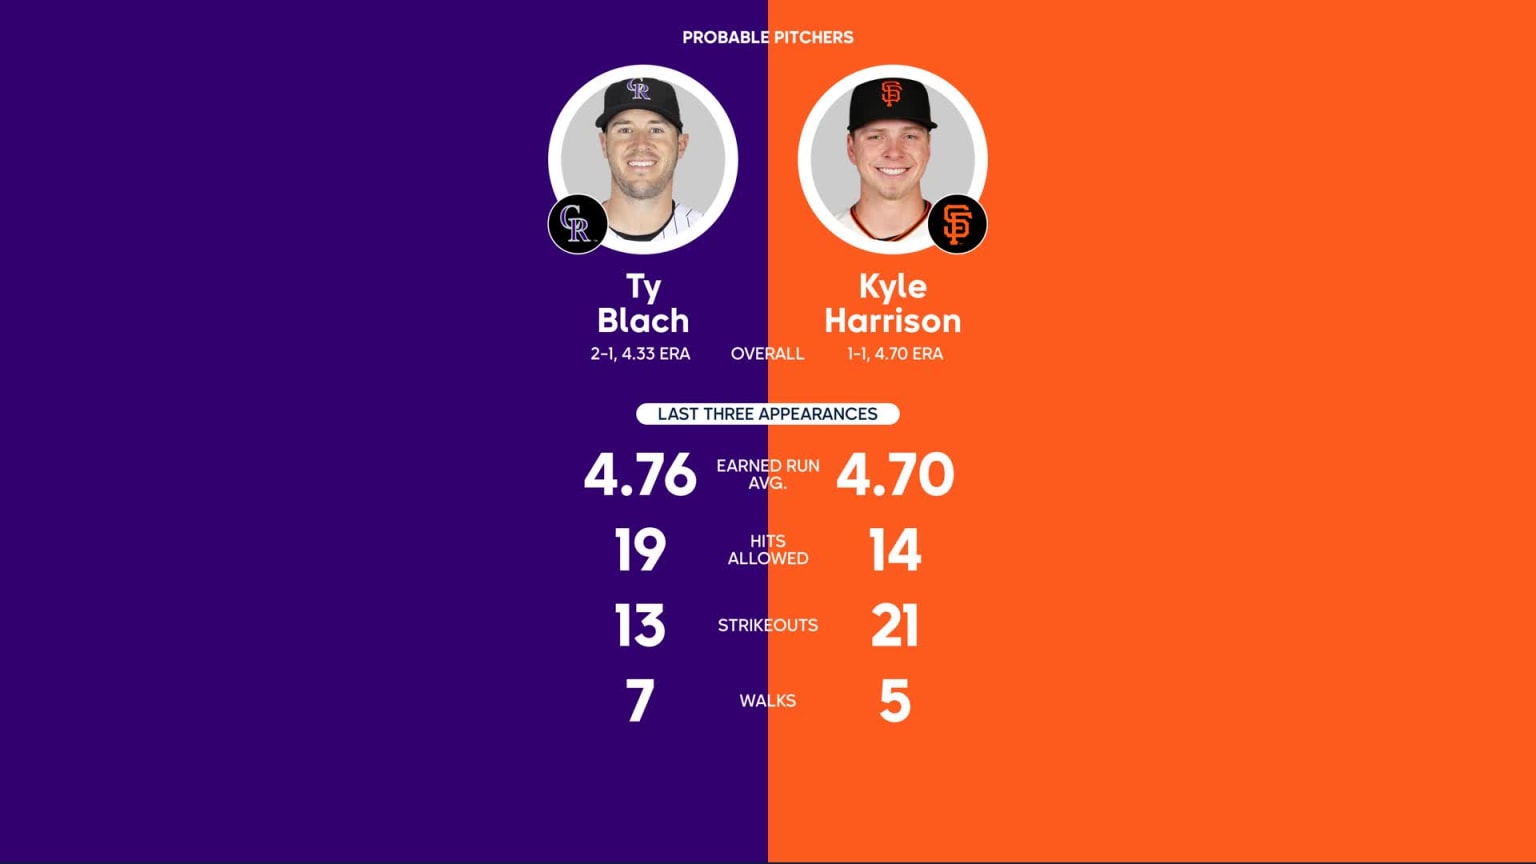 Giants vs. Rockies Probable Starting Pitching - July 9